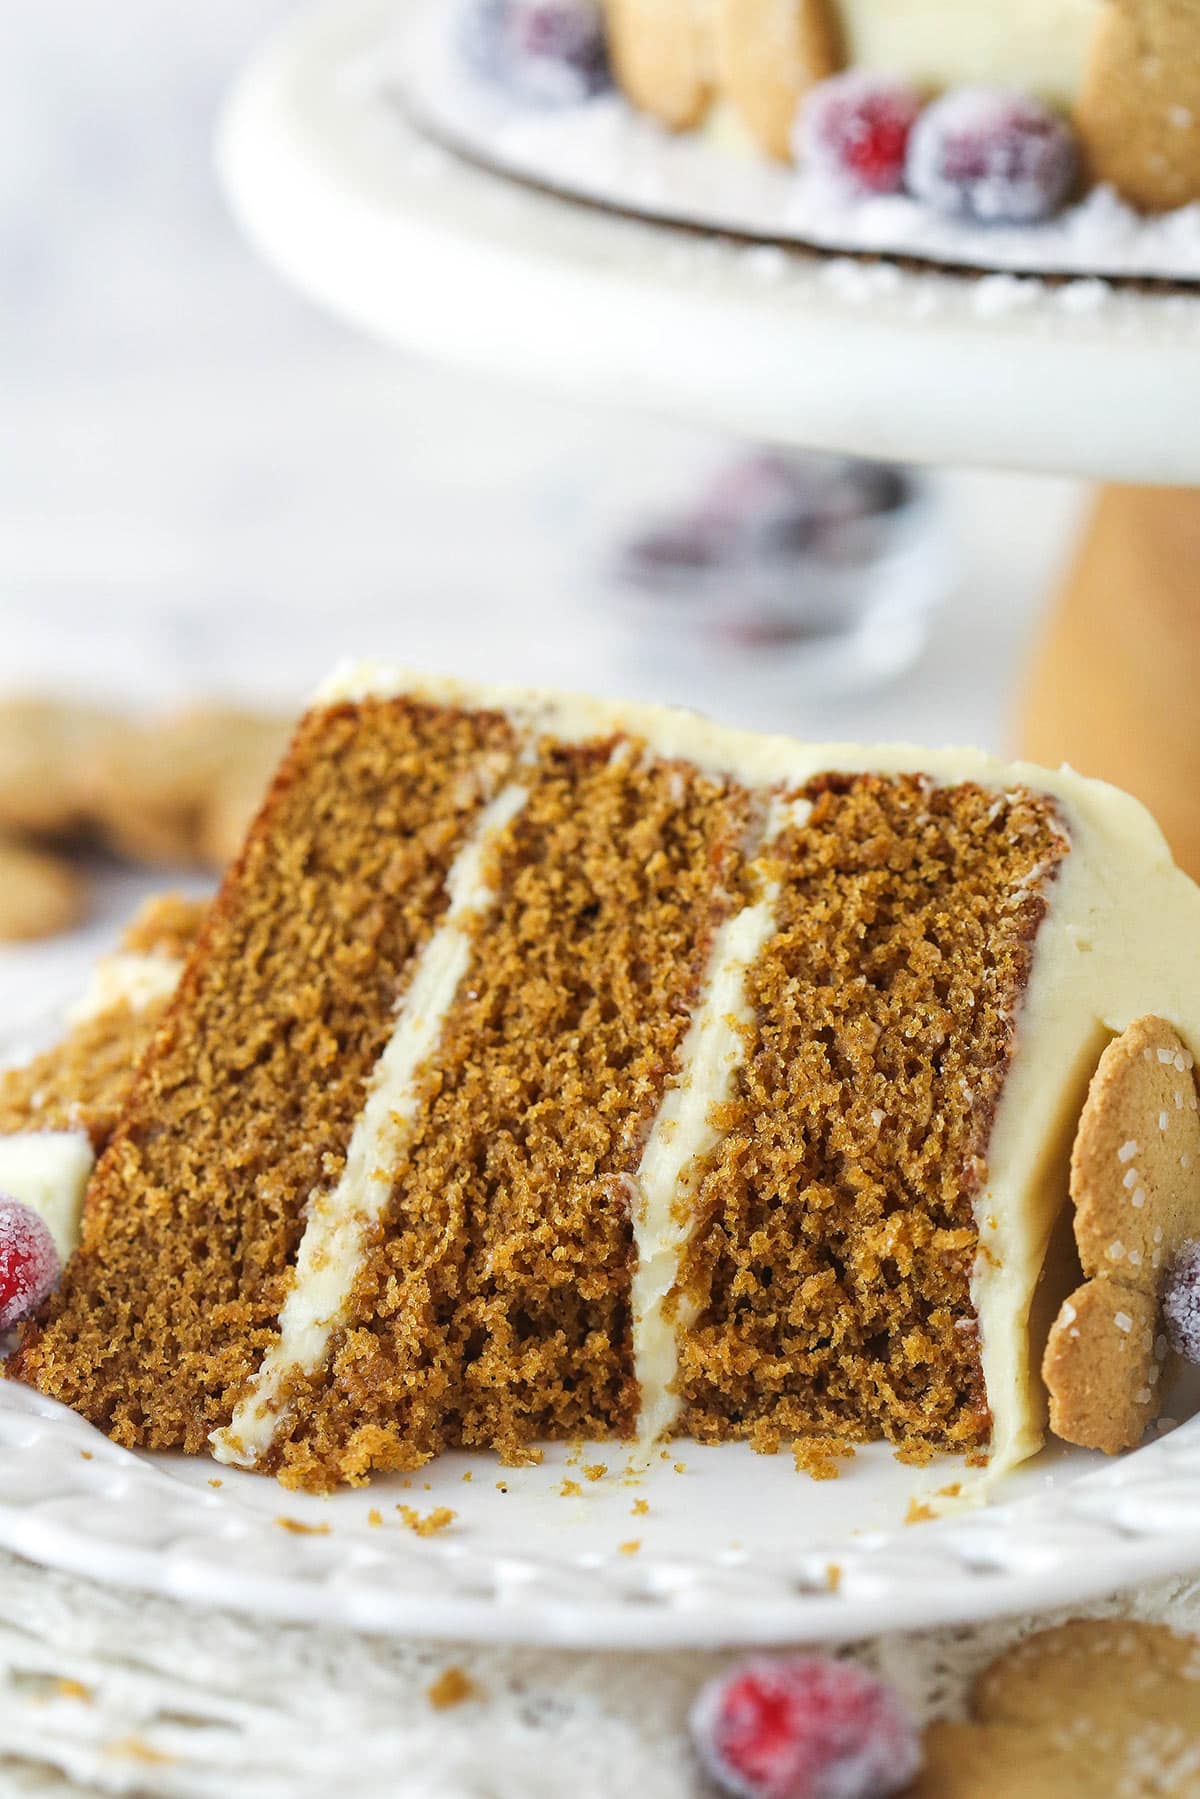 A slice of gingerbread cake with a bite taken out of it.